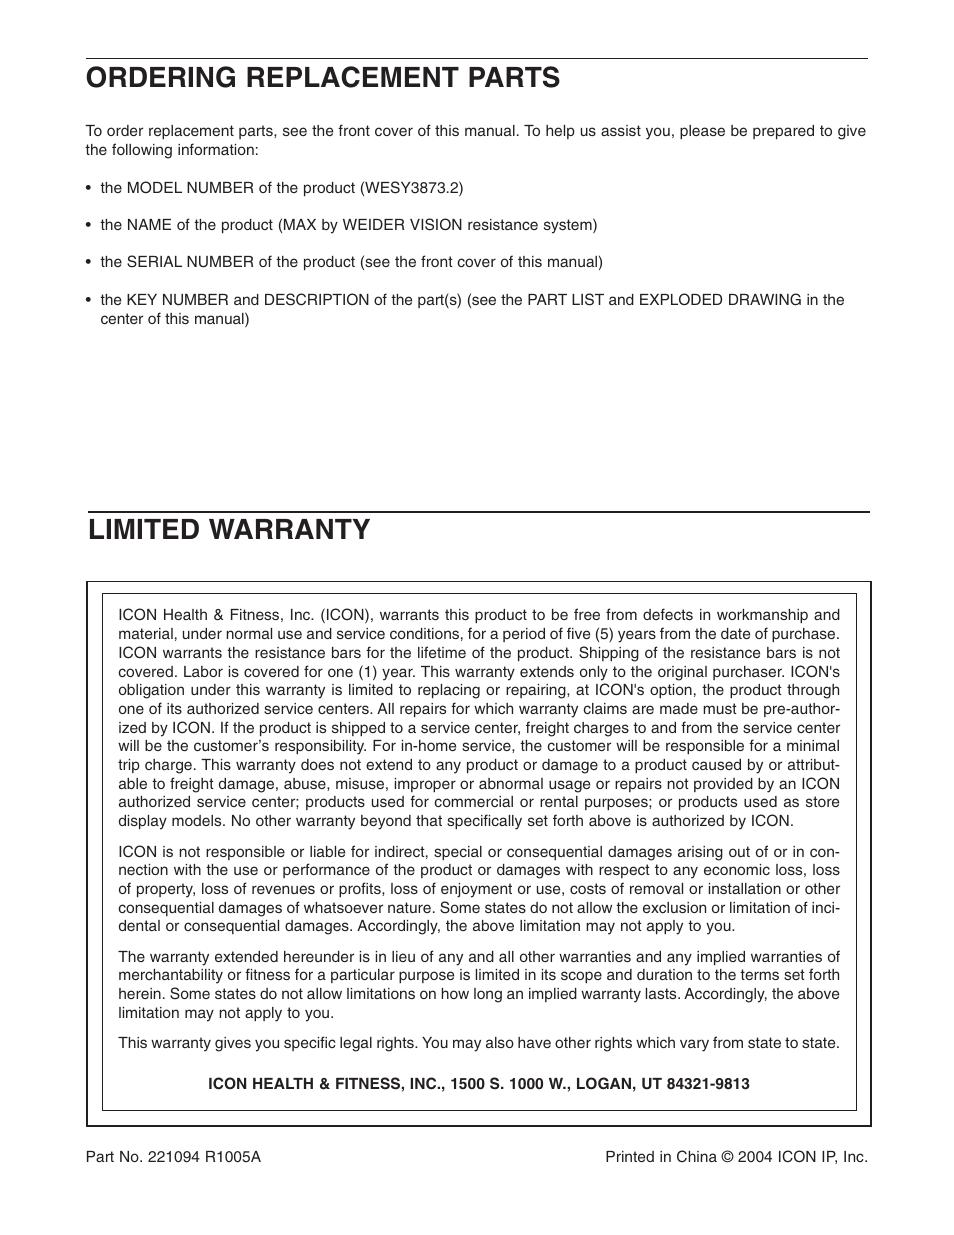 Ordering replacement parts, Limited warranty | Weider WESY3873.2 User Manual | Page 24 / 24